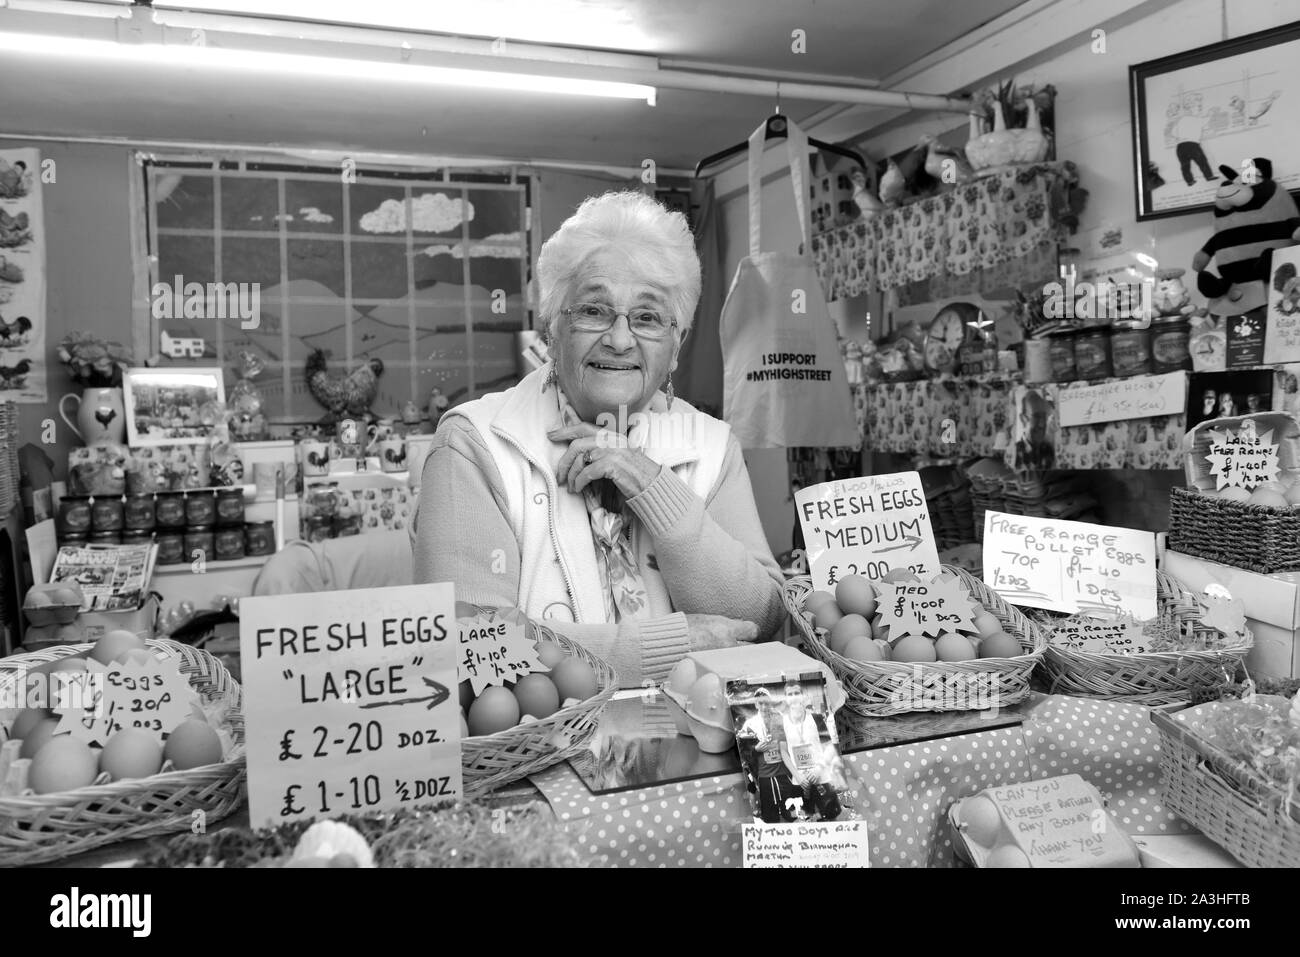 No early retiement for this lady... Wellington Market 2019 Margaret Robinson the egg lady aged 84 has been working on market stalls since she was 13. Stock Photo